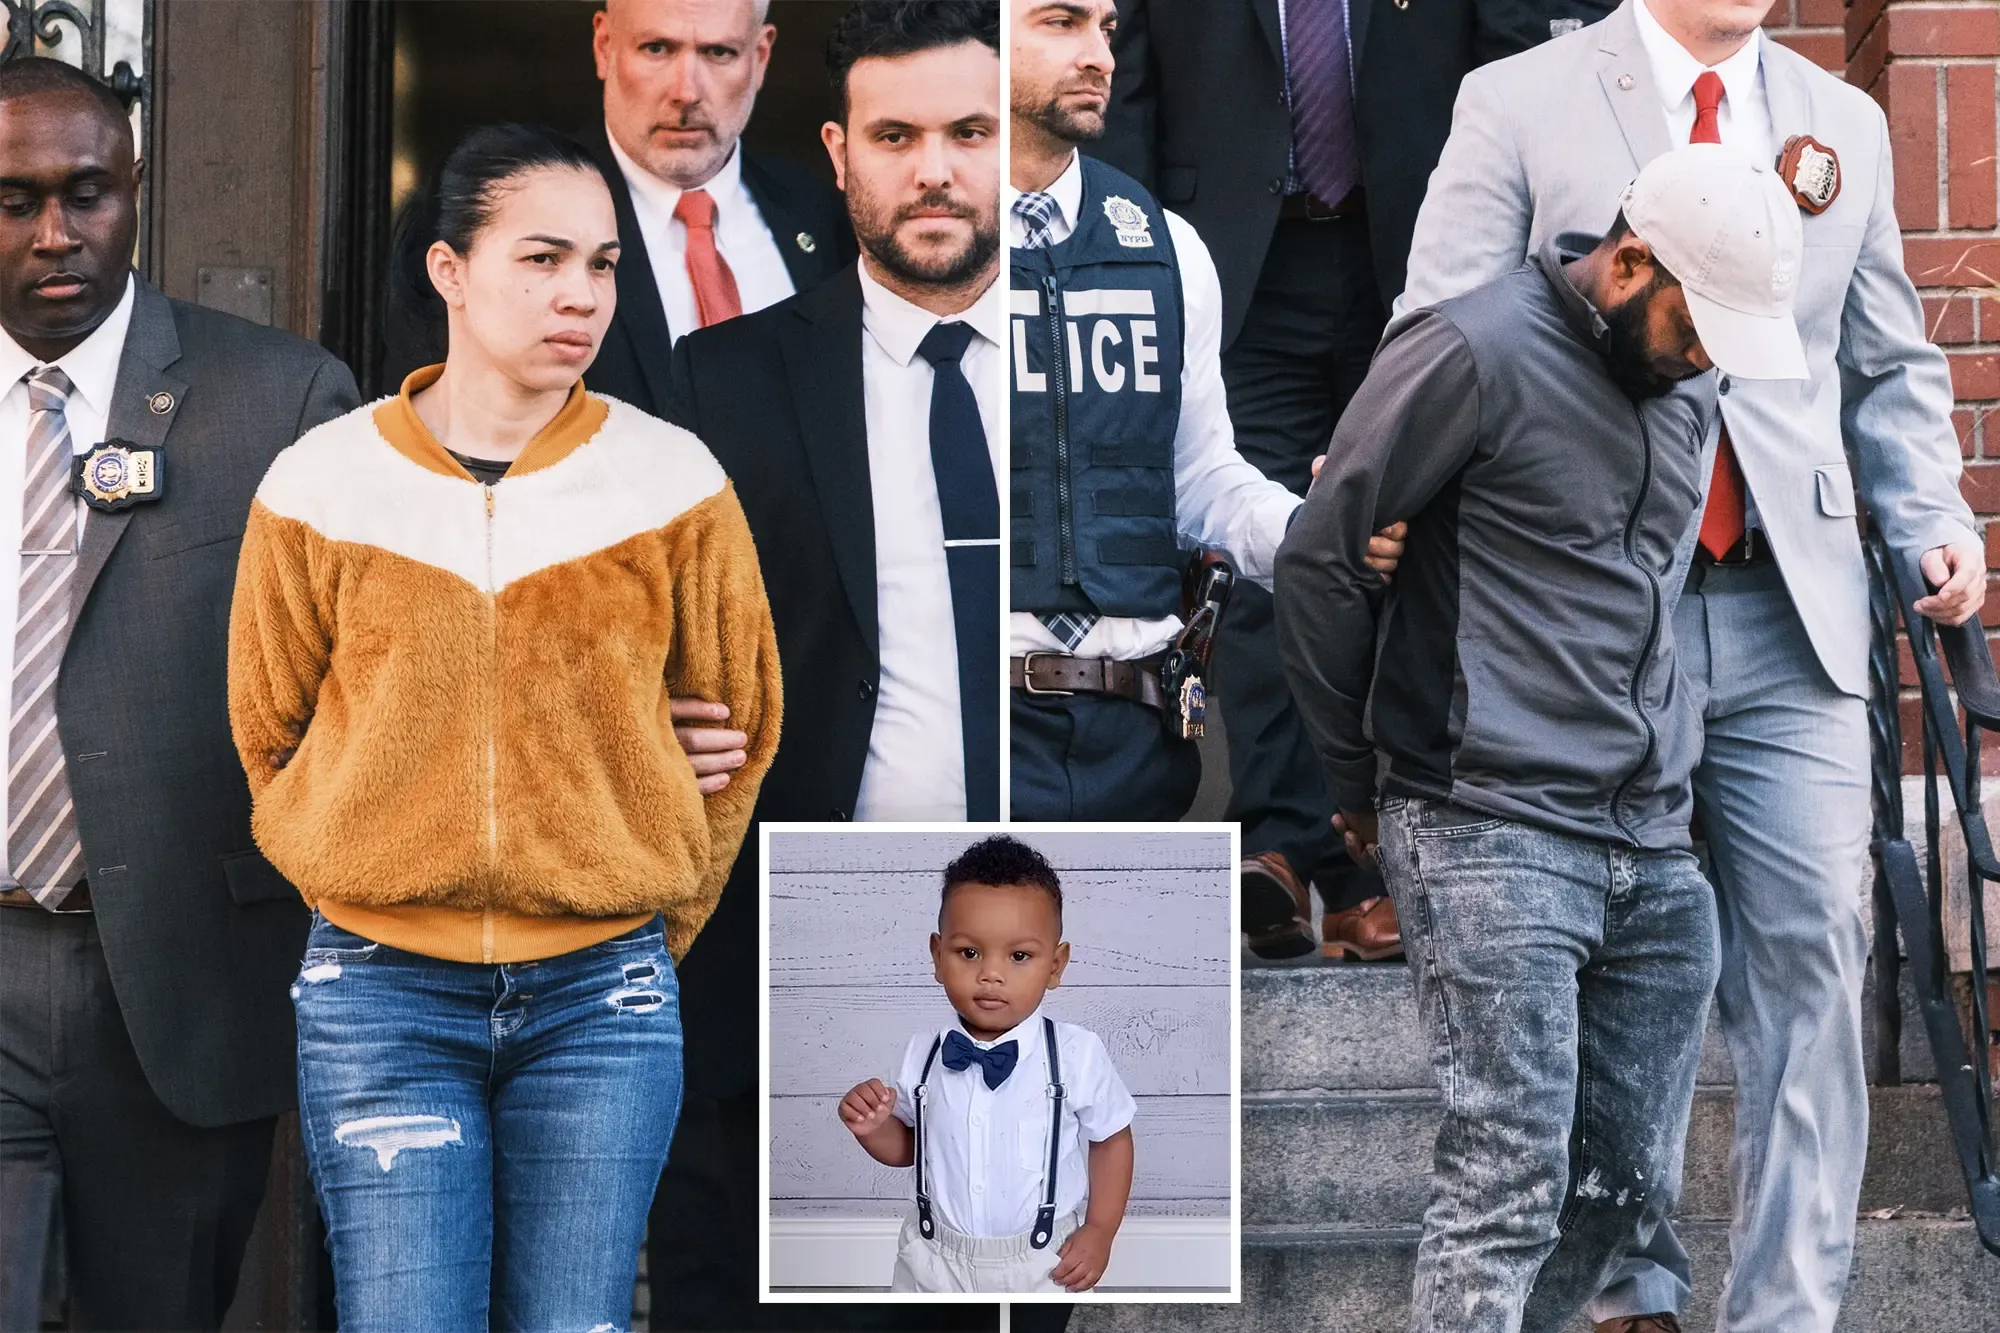 Bronx day care suspects hauled off to face charges after apparent fentanyl exposure killed toddler, hospitalized 3 others